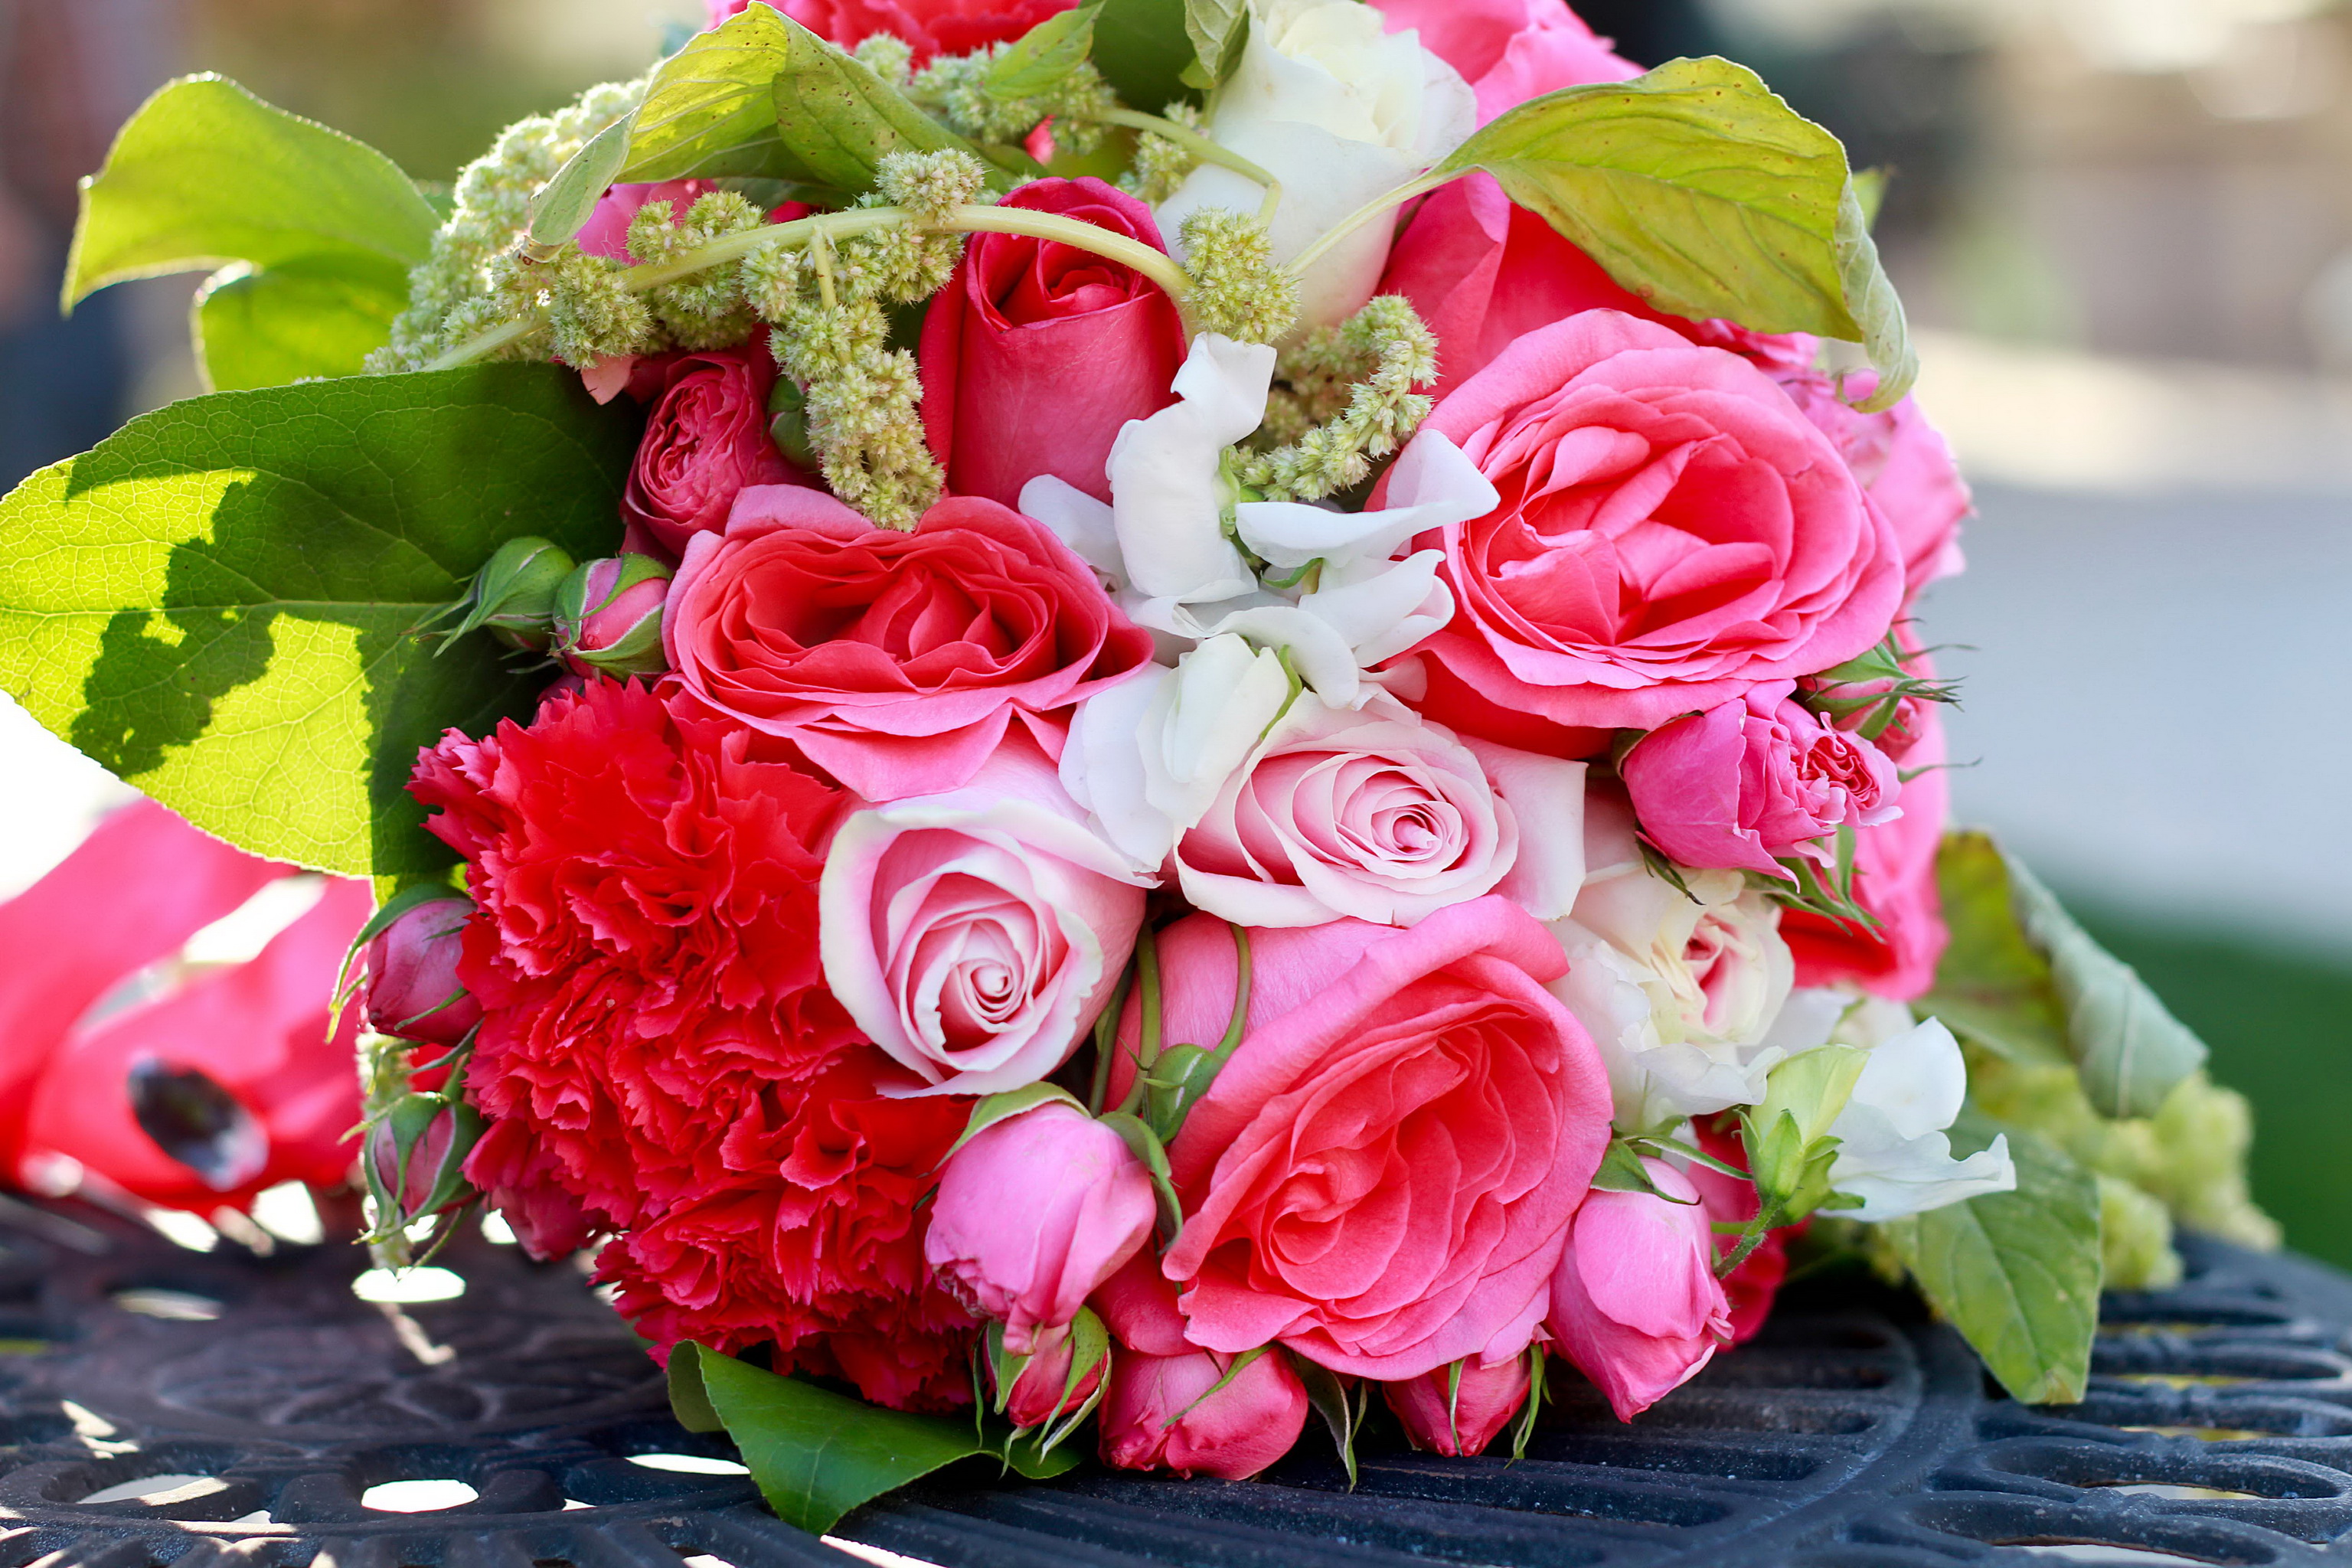 bouquets, Roses, Flowers Wallpapers HD / Desktop and Mobile Backgrounds